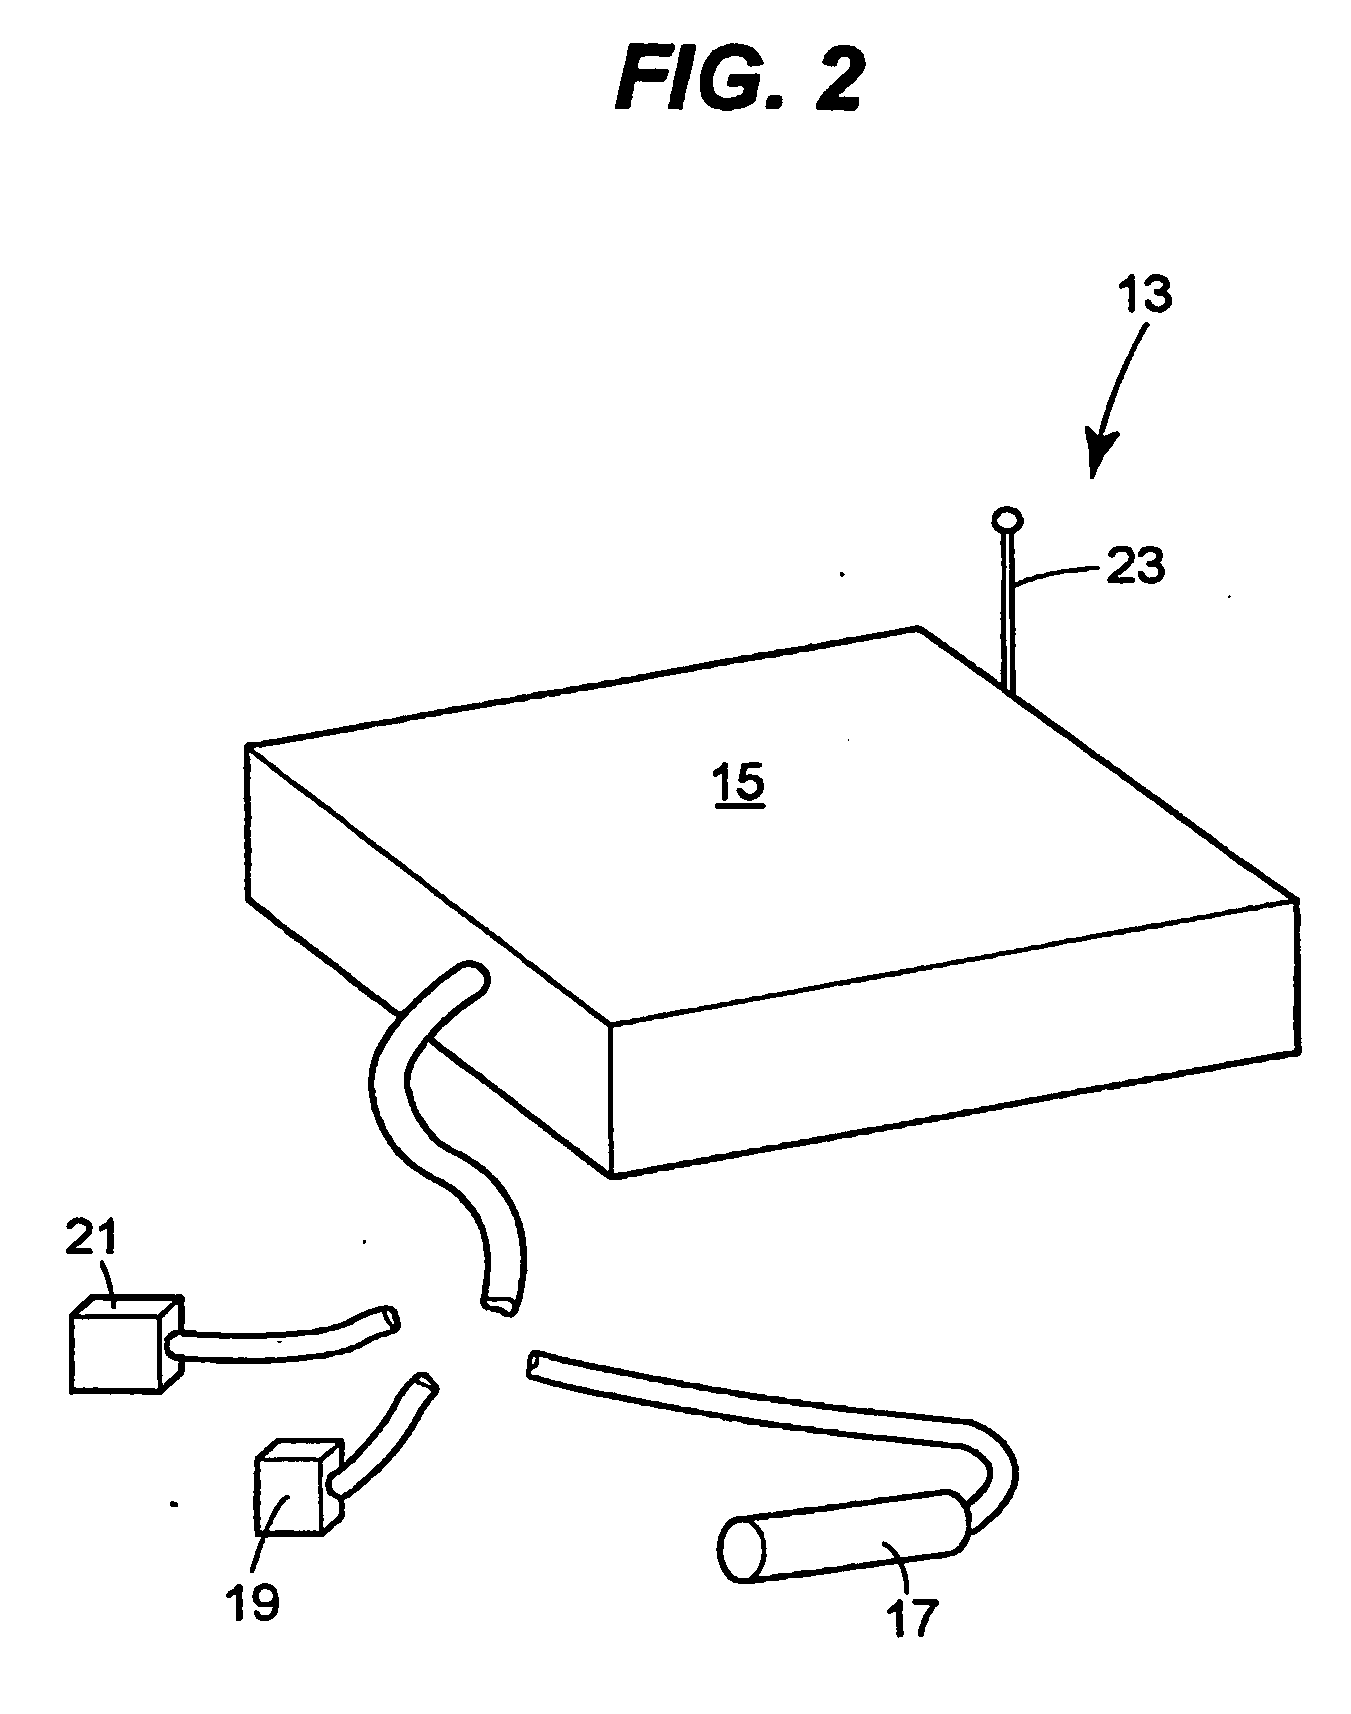 Shipping container and method of using same